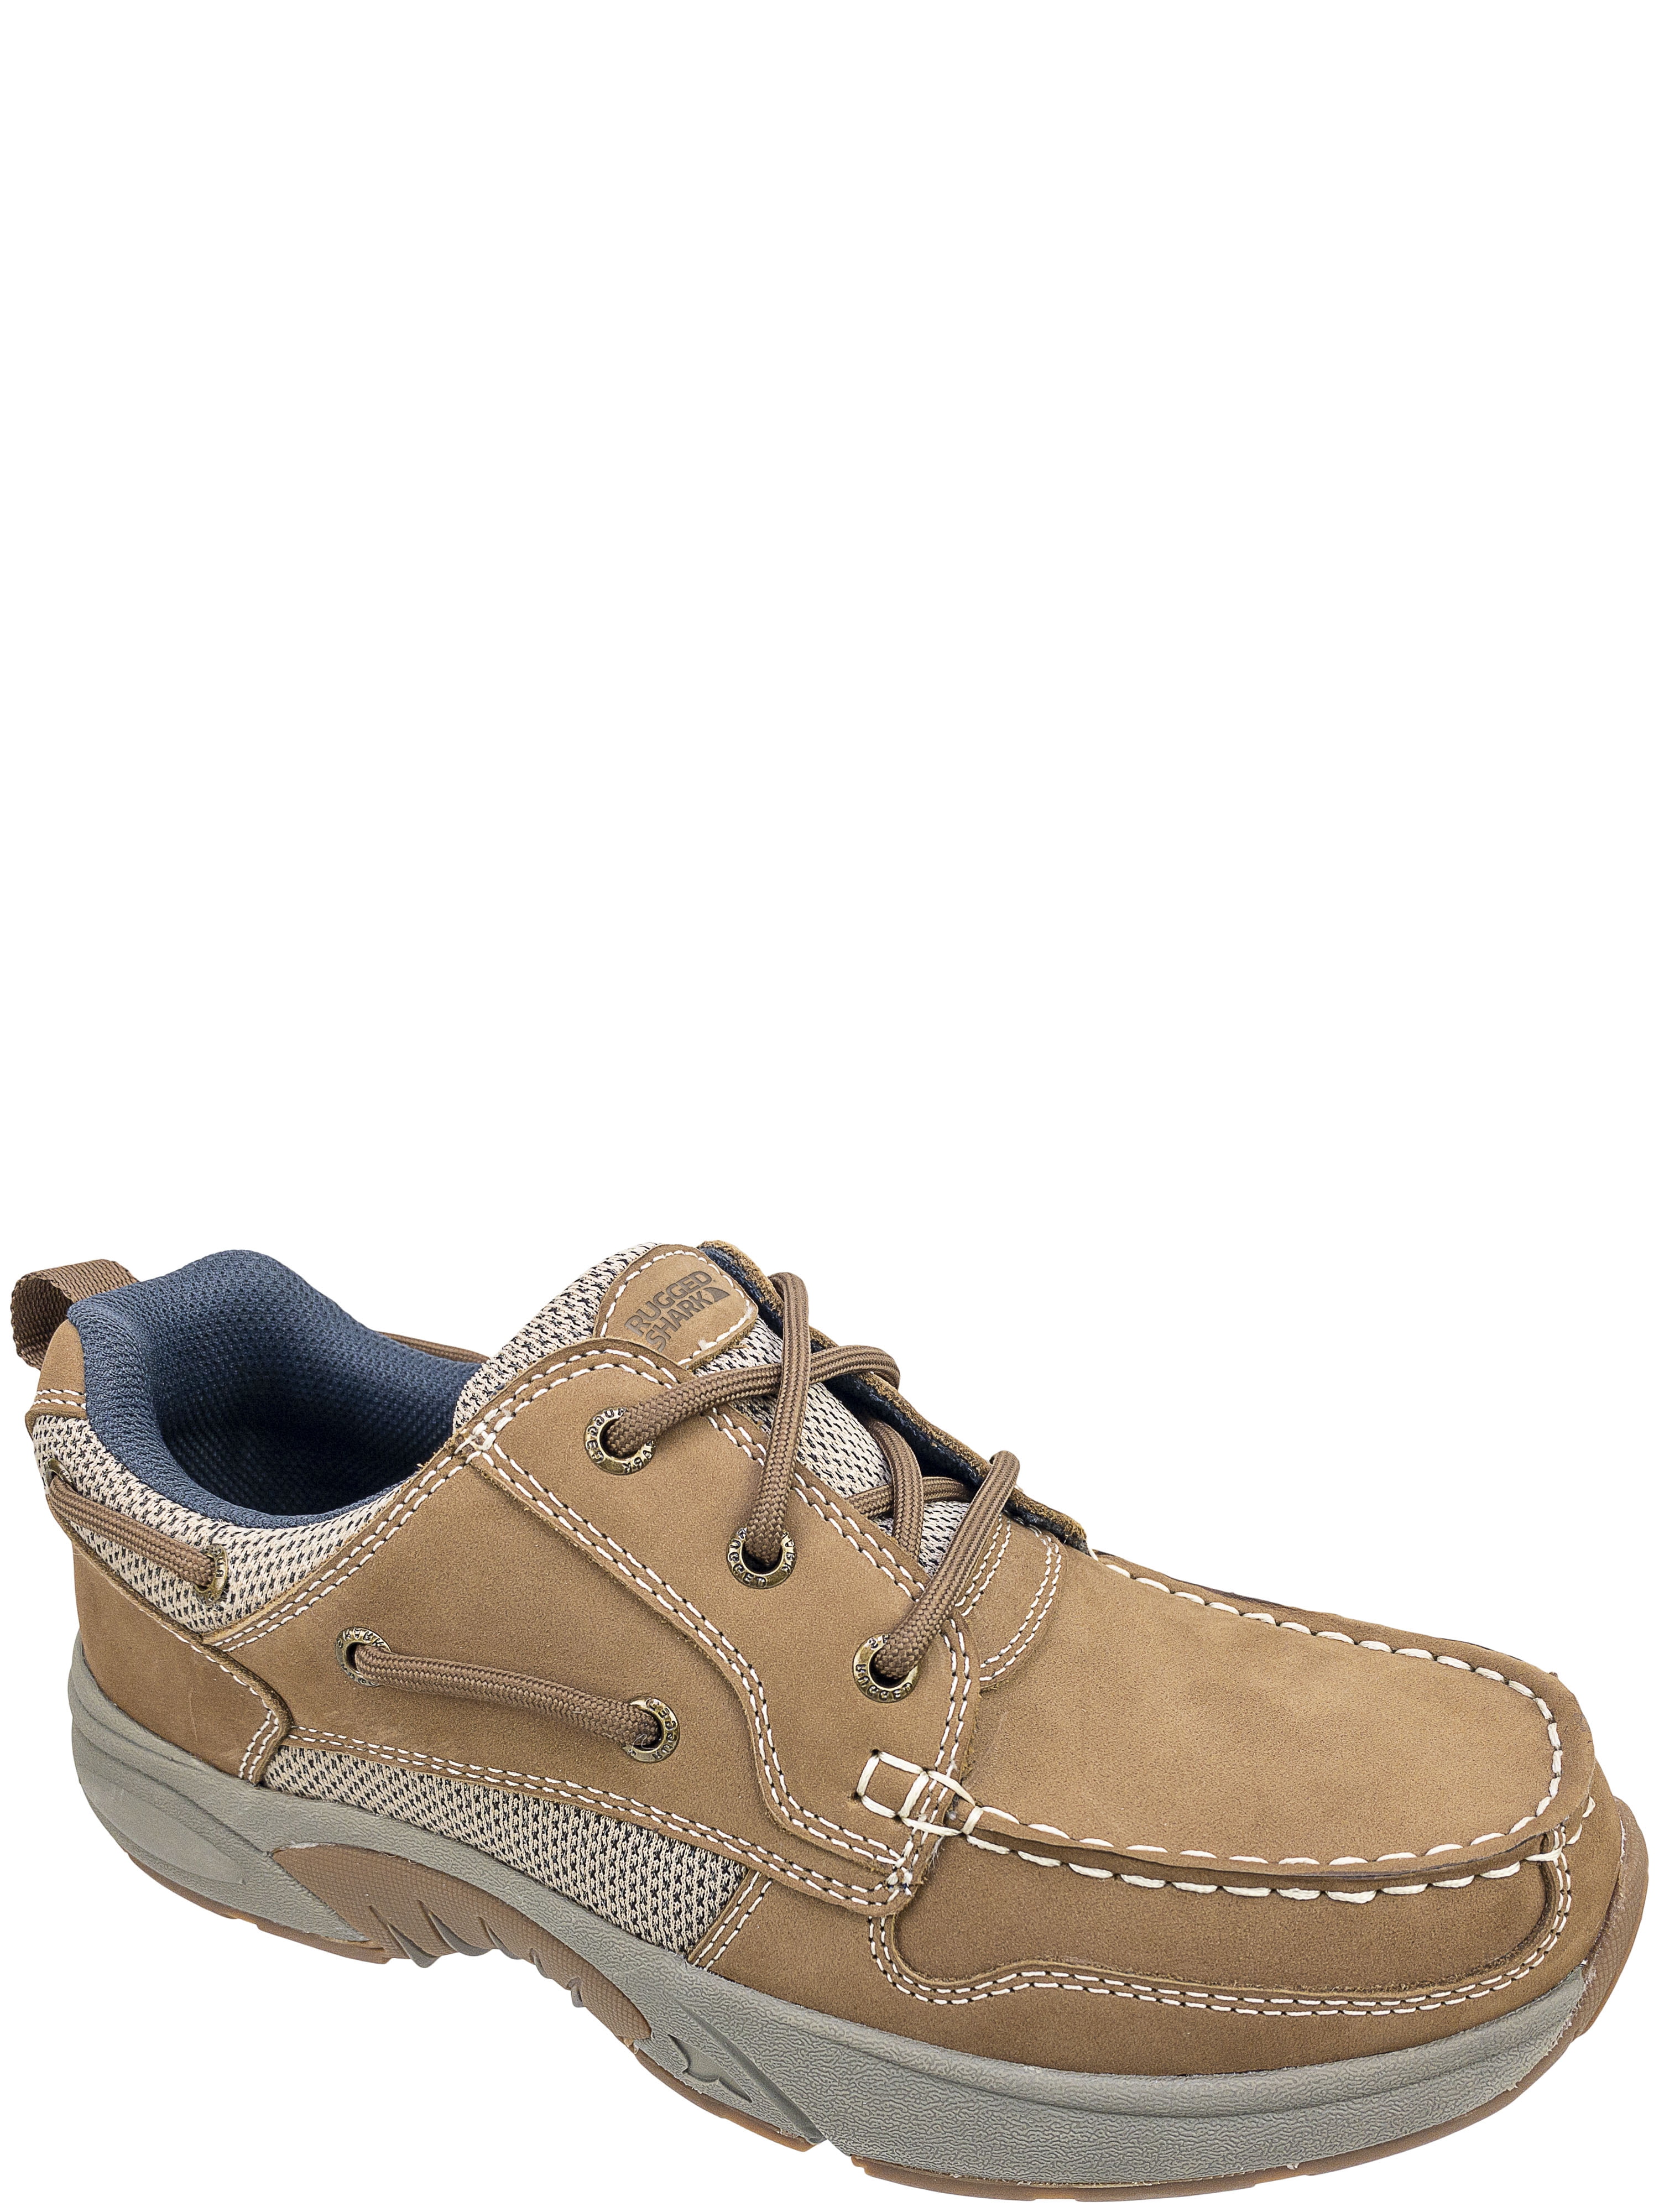 Rugged Shark Men S Axis Boat Shoe Premium Leather Comfort Footbed Tan Size 10 5 Com